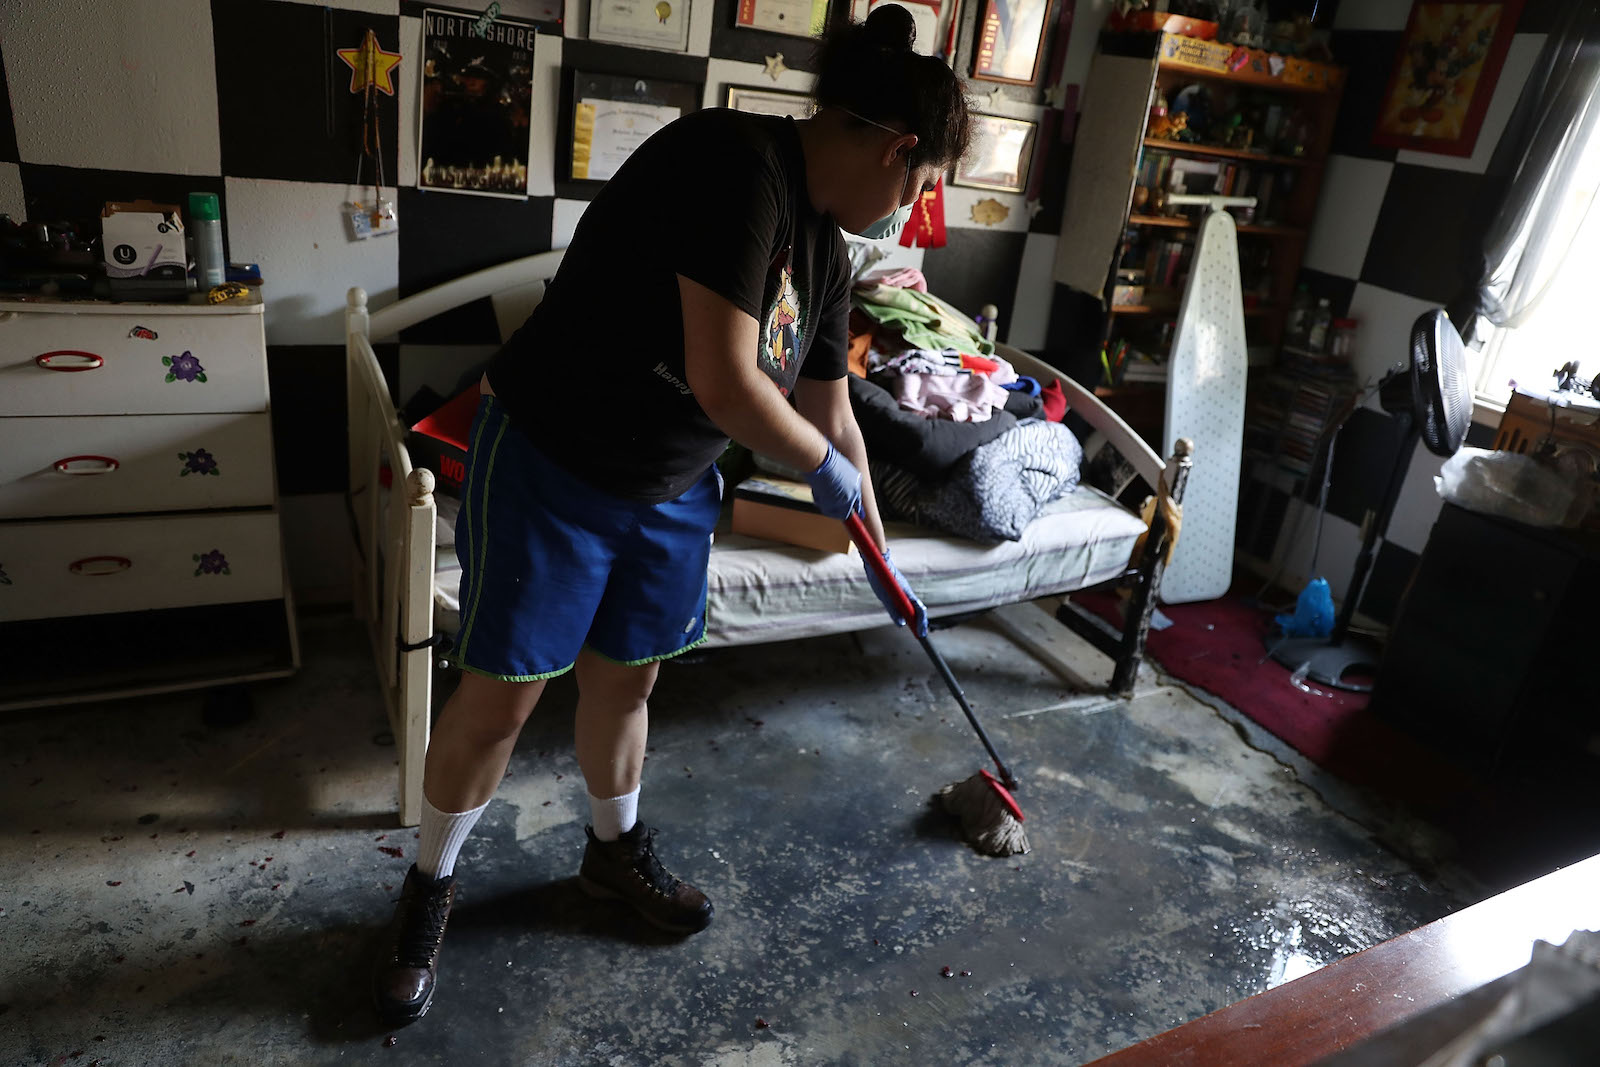 A woman with dark hair, wearing blue short and a black t-shirt, mops up floodwater in her bedroom in Houston, Texas following Hurricane Harvey in September 2017.